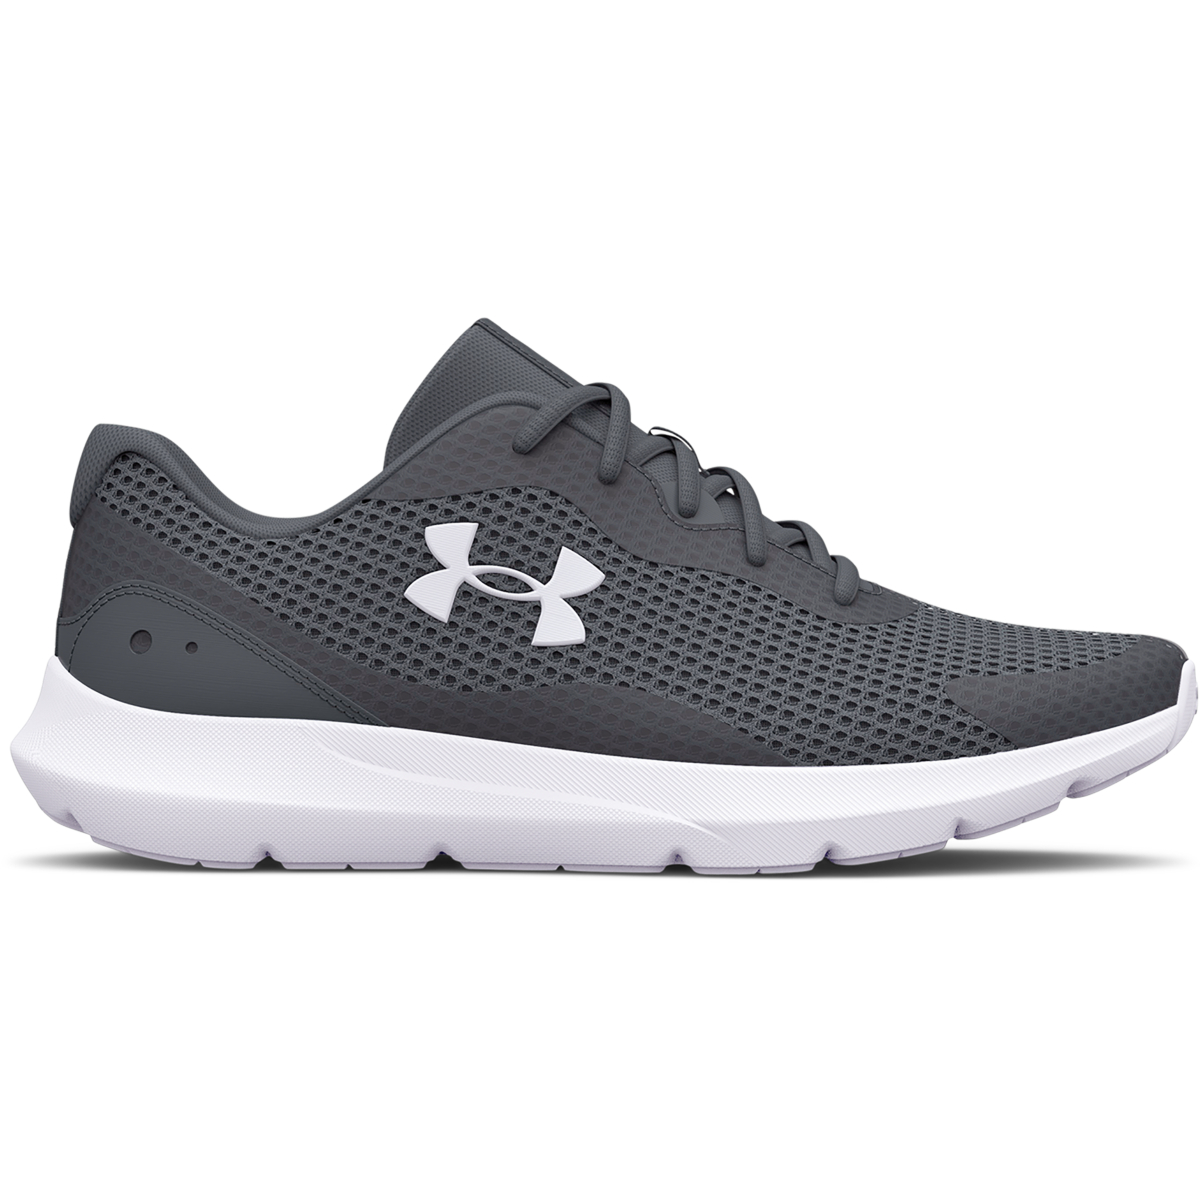 Under Armour - 3024883 Men's UA Surge 3 Running Shoes - 102/G691 Ανδρικά > Παπούτσια > Αθλητικά > Παπούτσι Low Cut